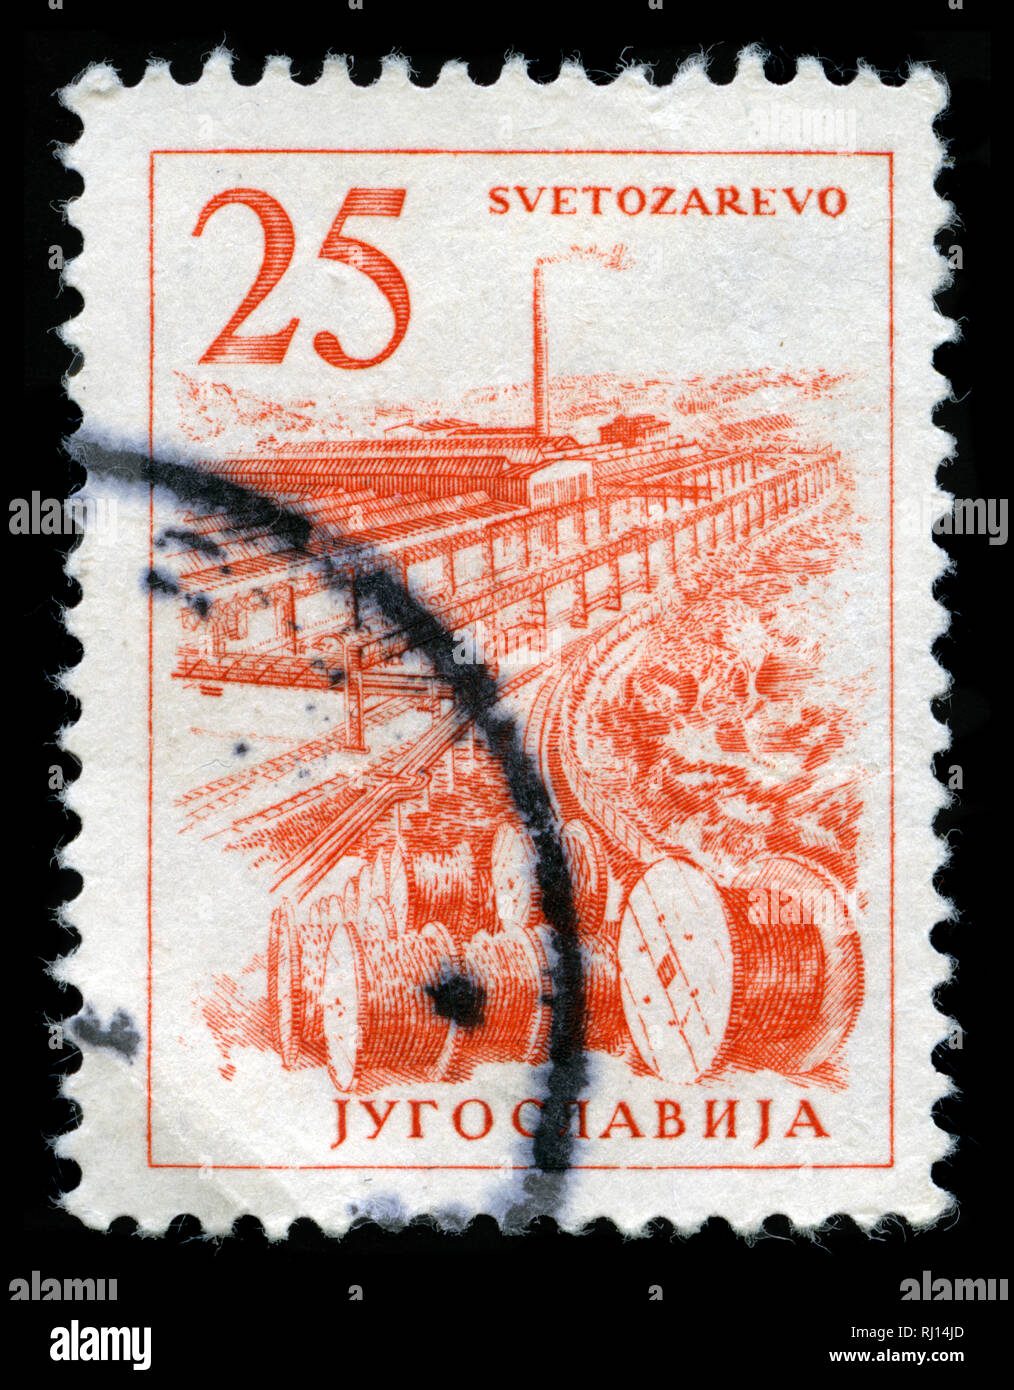 Postage stamp from the former state of Yugoslavia in the Engineering and Architecture series issued in 1961 Stock Photo